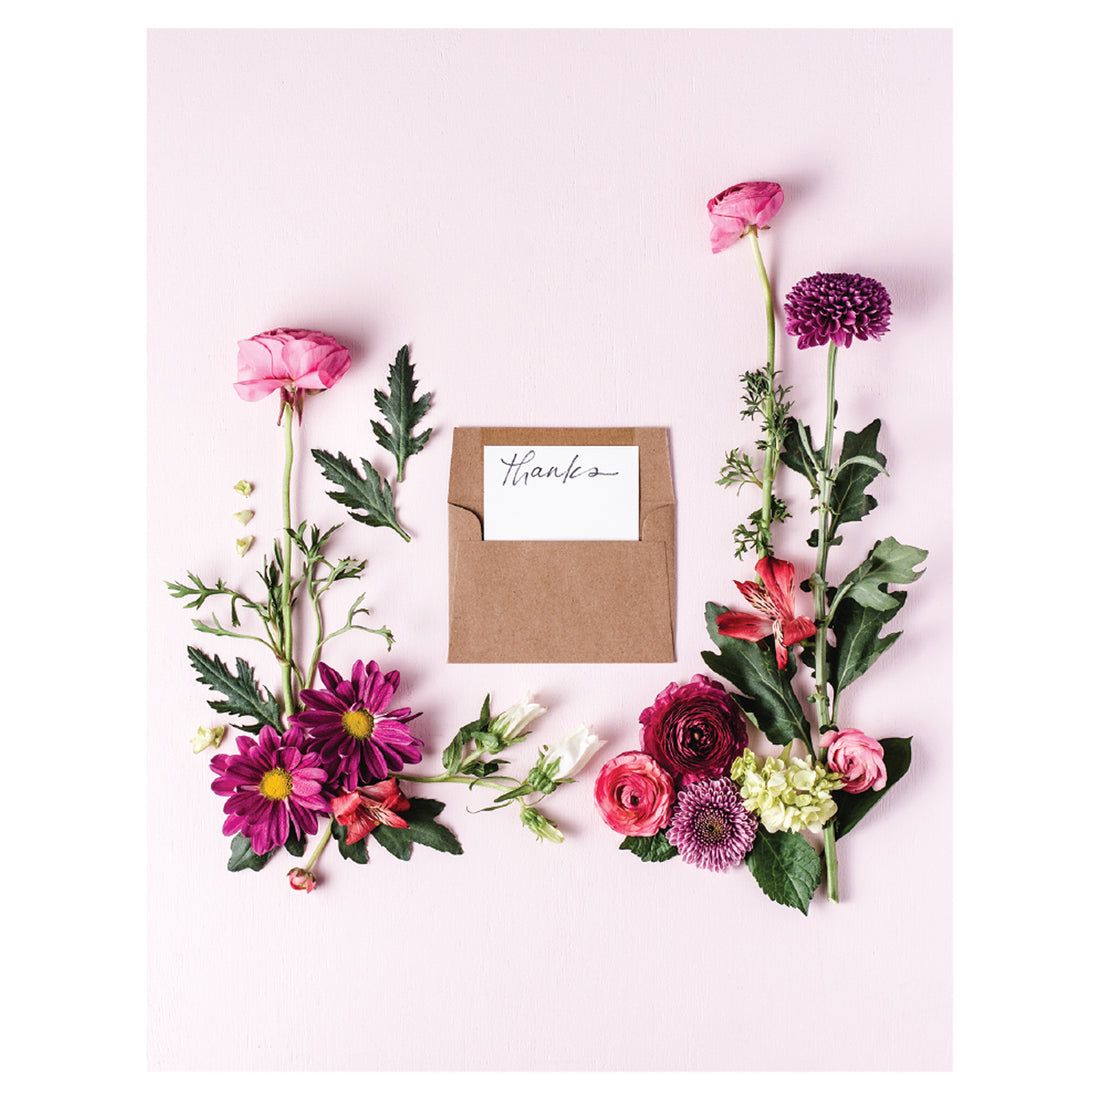 A photo of an open tan kraft paper envelope surrounded by various pink and purple flowers on a light pink background, with a hand-written note that says &quot;thanks&quot; peeking out of the envelope.